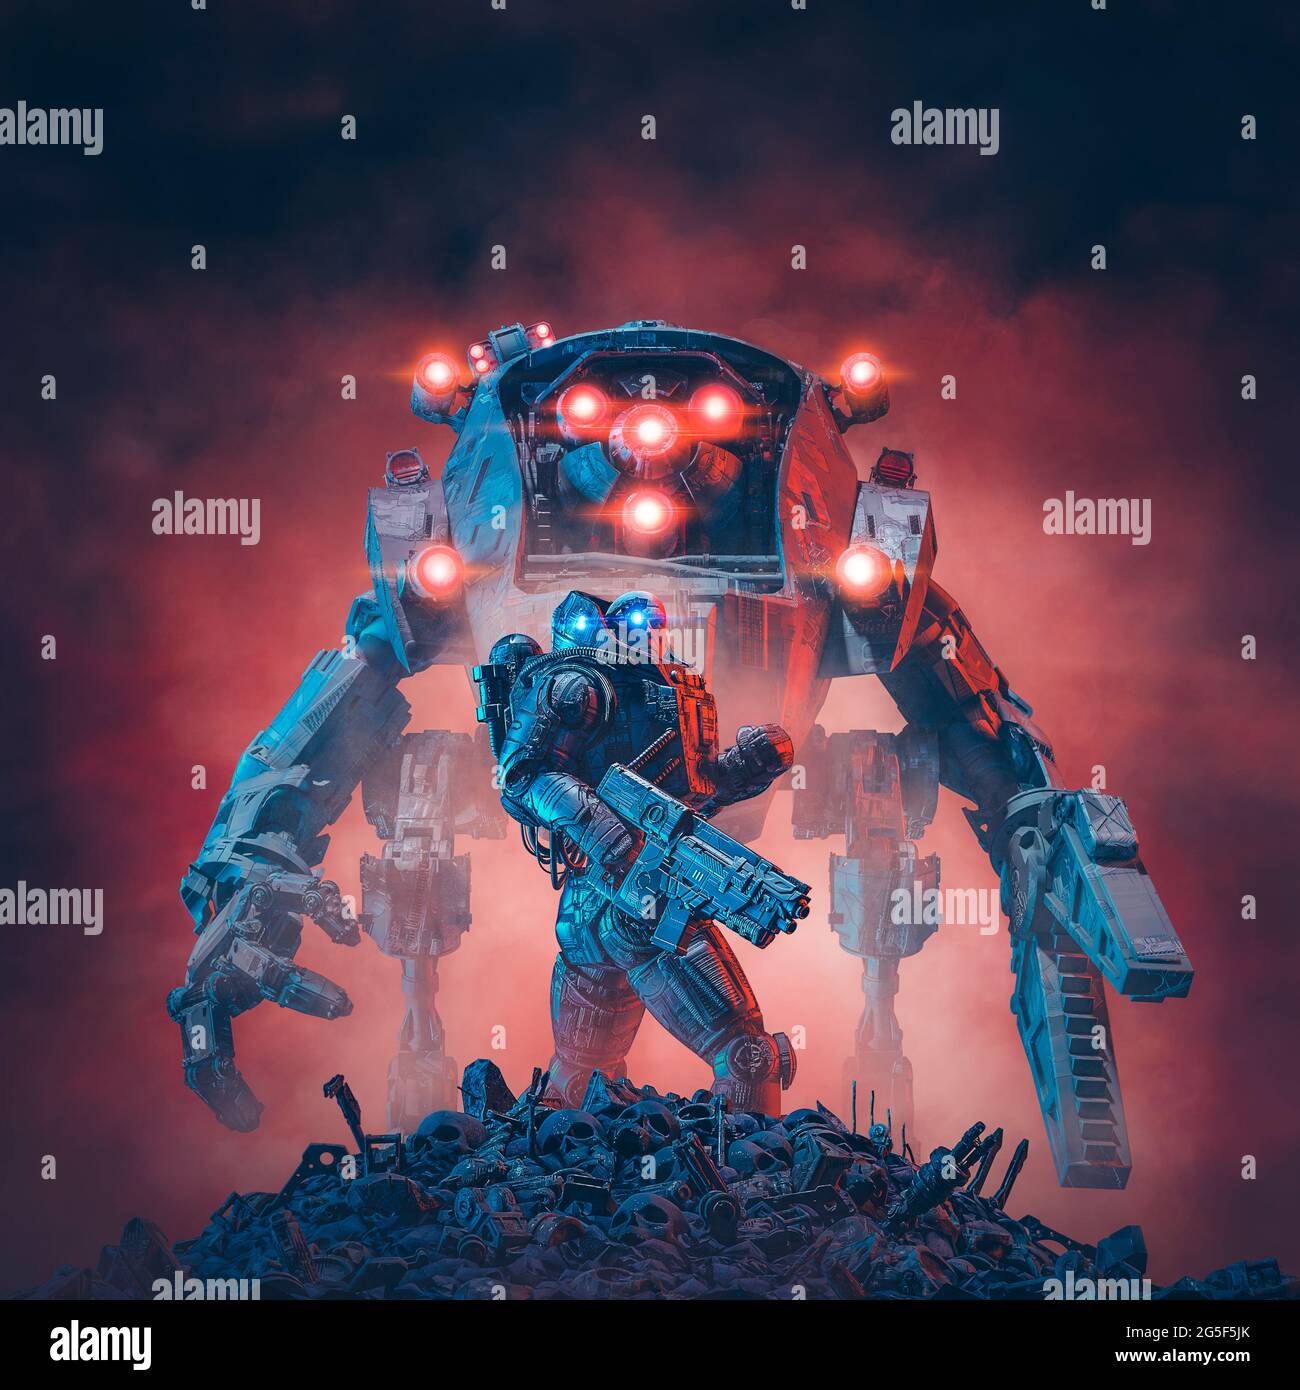 Space soldier mech robot / 3D illustration of science fiction military  warrior and giant robotic mecha standing on battle field with ominous red  sky b Stock Photo - Alamy